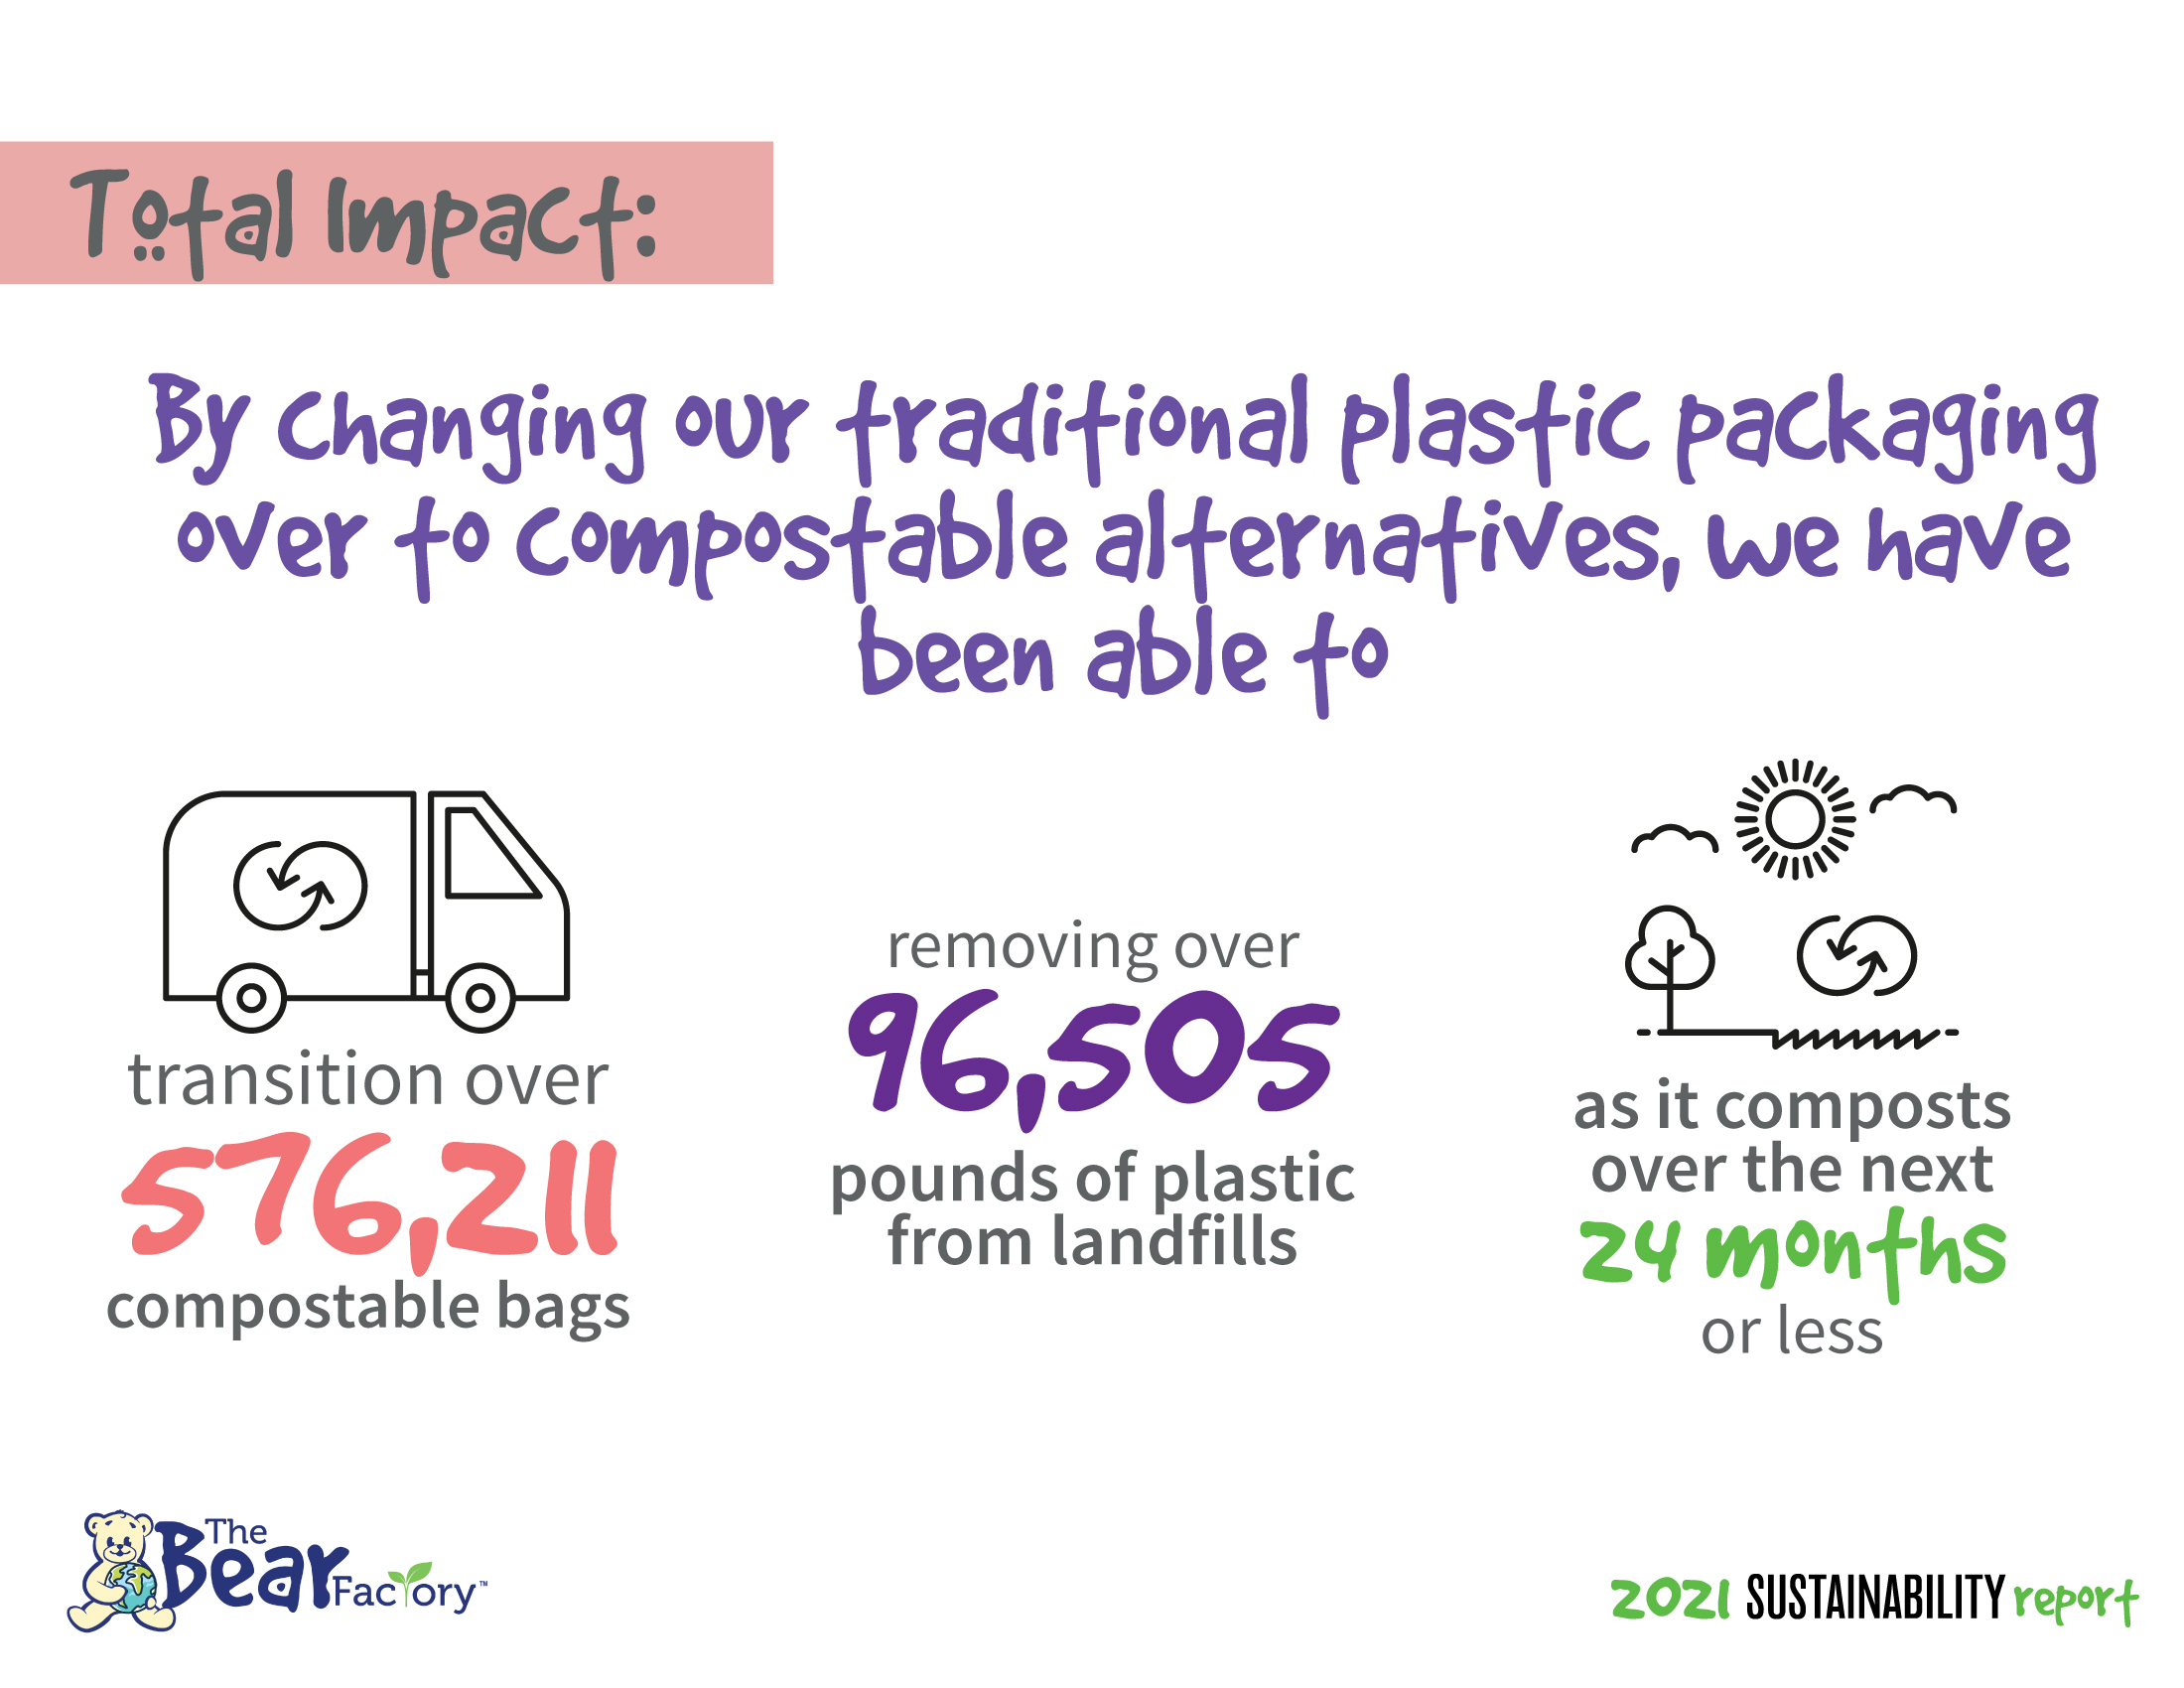 Total Impact: By Changing our traditional plastic packaging over to compostable alternatives, we have been able to transition over 576,211 compostable bags Bear Factory removing over 96,505 pounds of plastic from landfills as it composts over the next 24 months or less